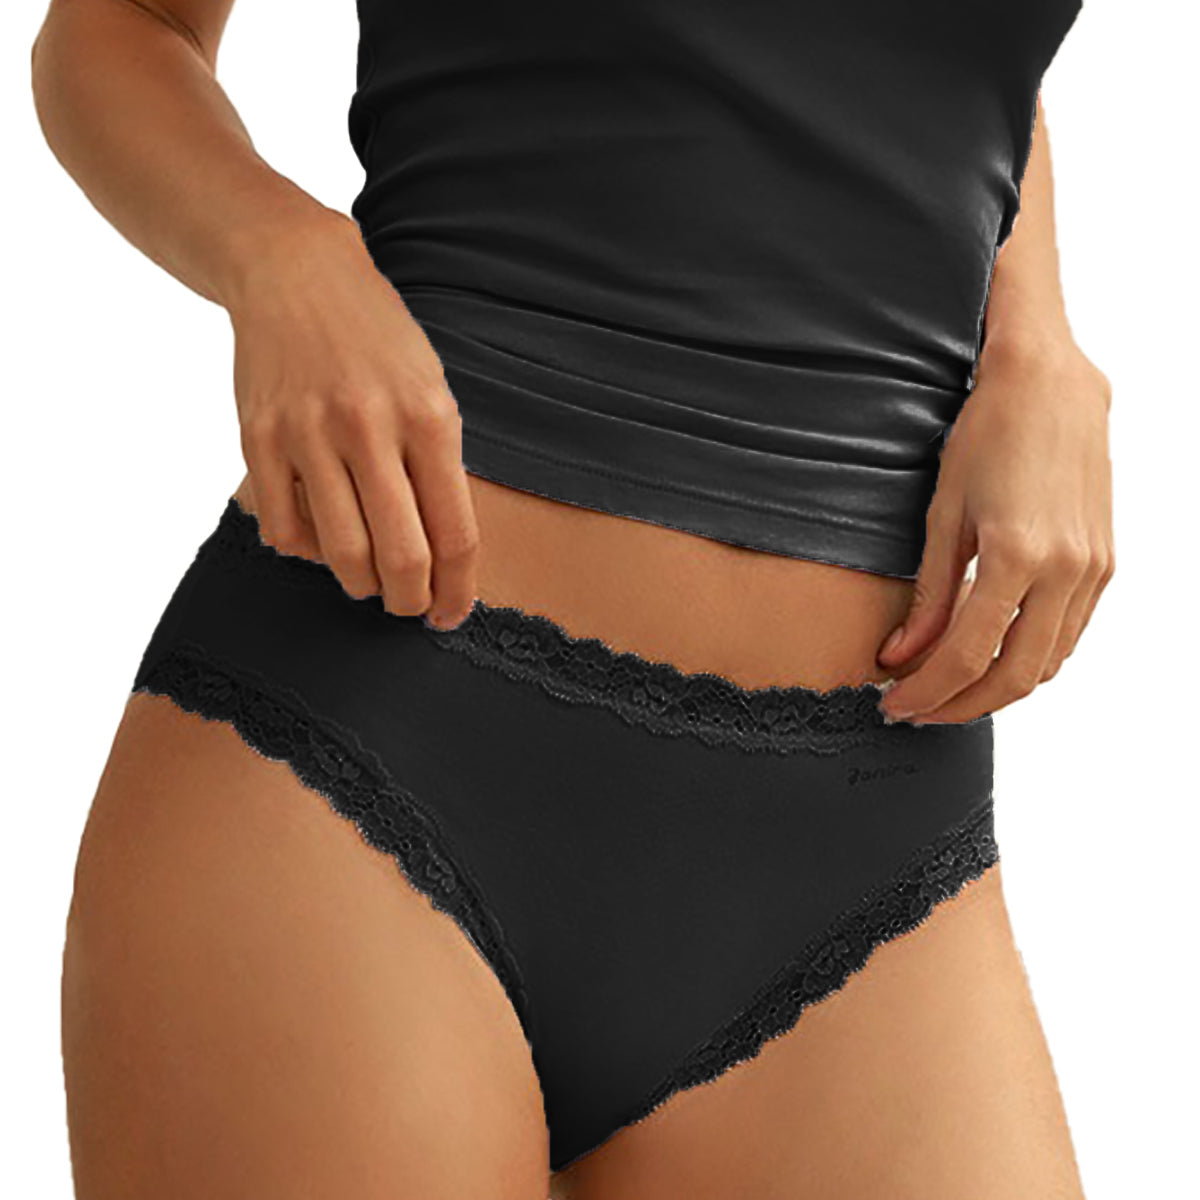  Dolce Fiora Every Heavenly Fit Loincloth Panties, Full Lace,  Single Item, BK-Black : Clothing, Shoes & Jewelry